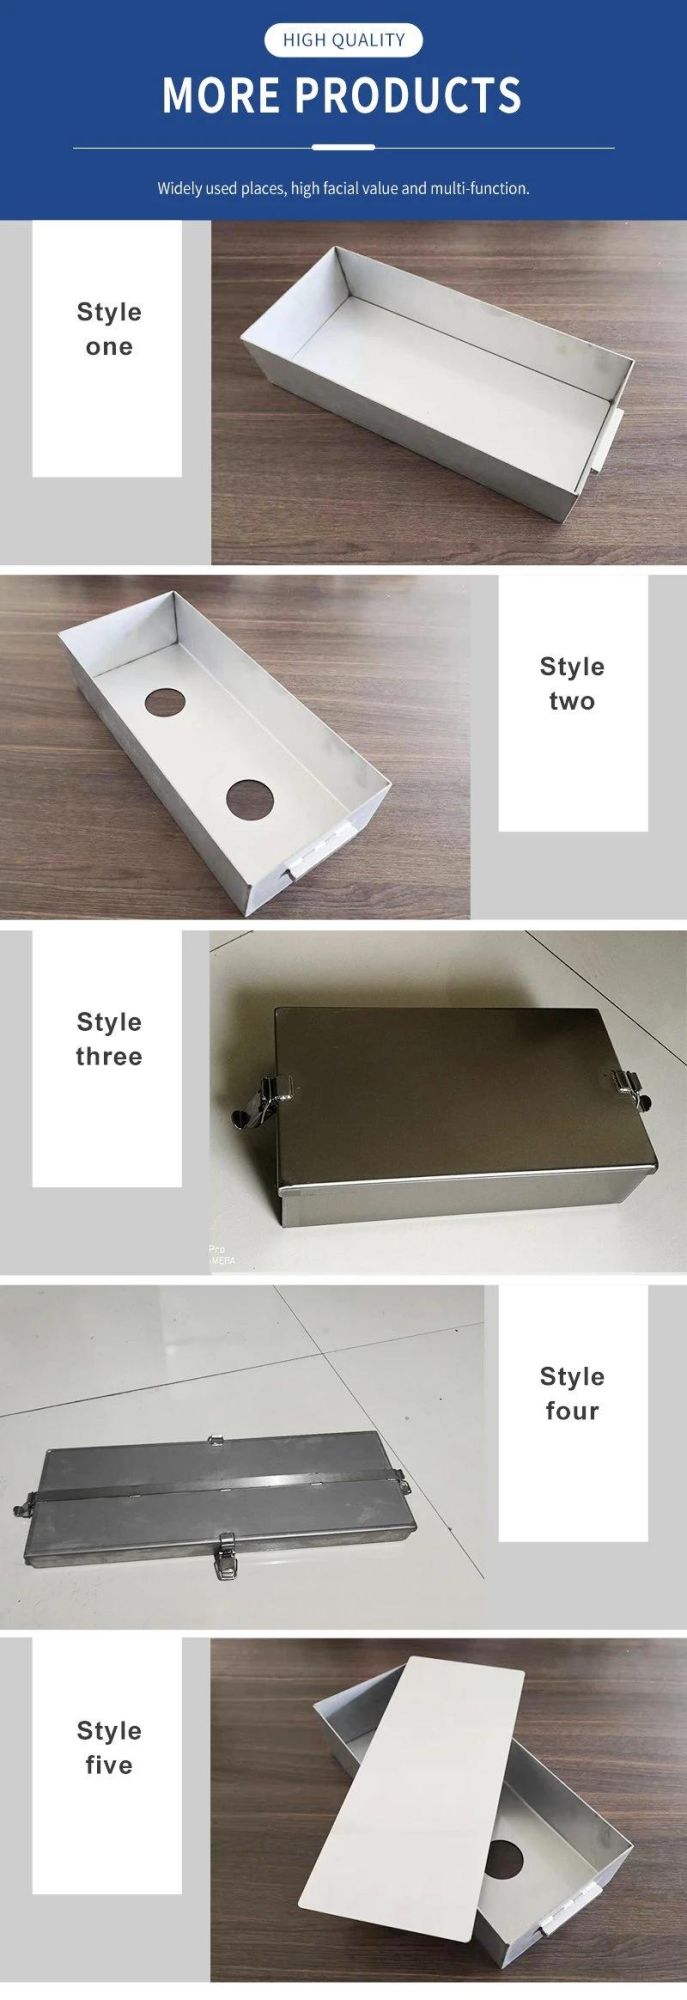 Perfect Quality Tissue Box Mold with Best Price in China